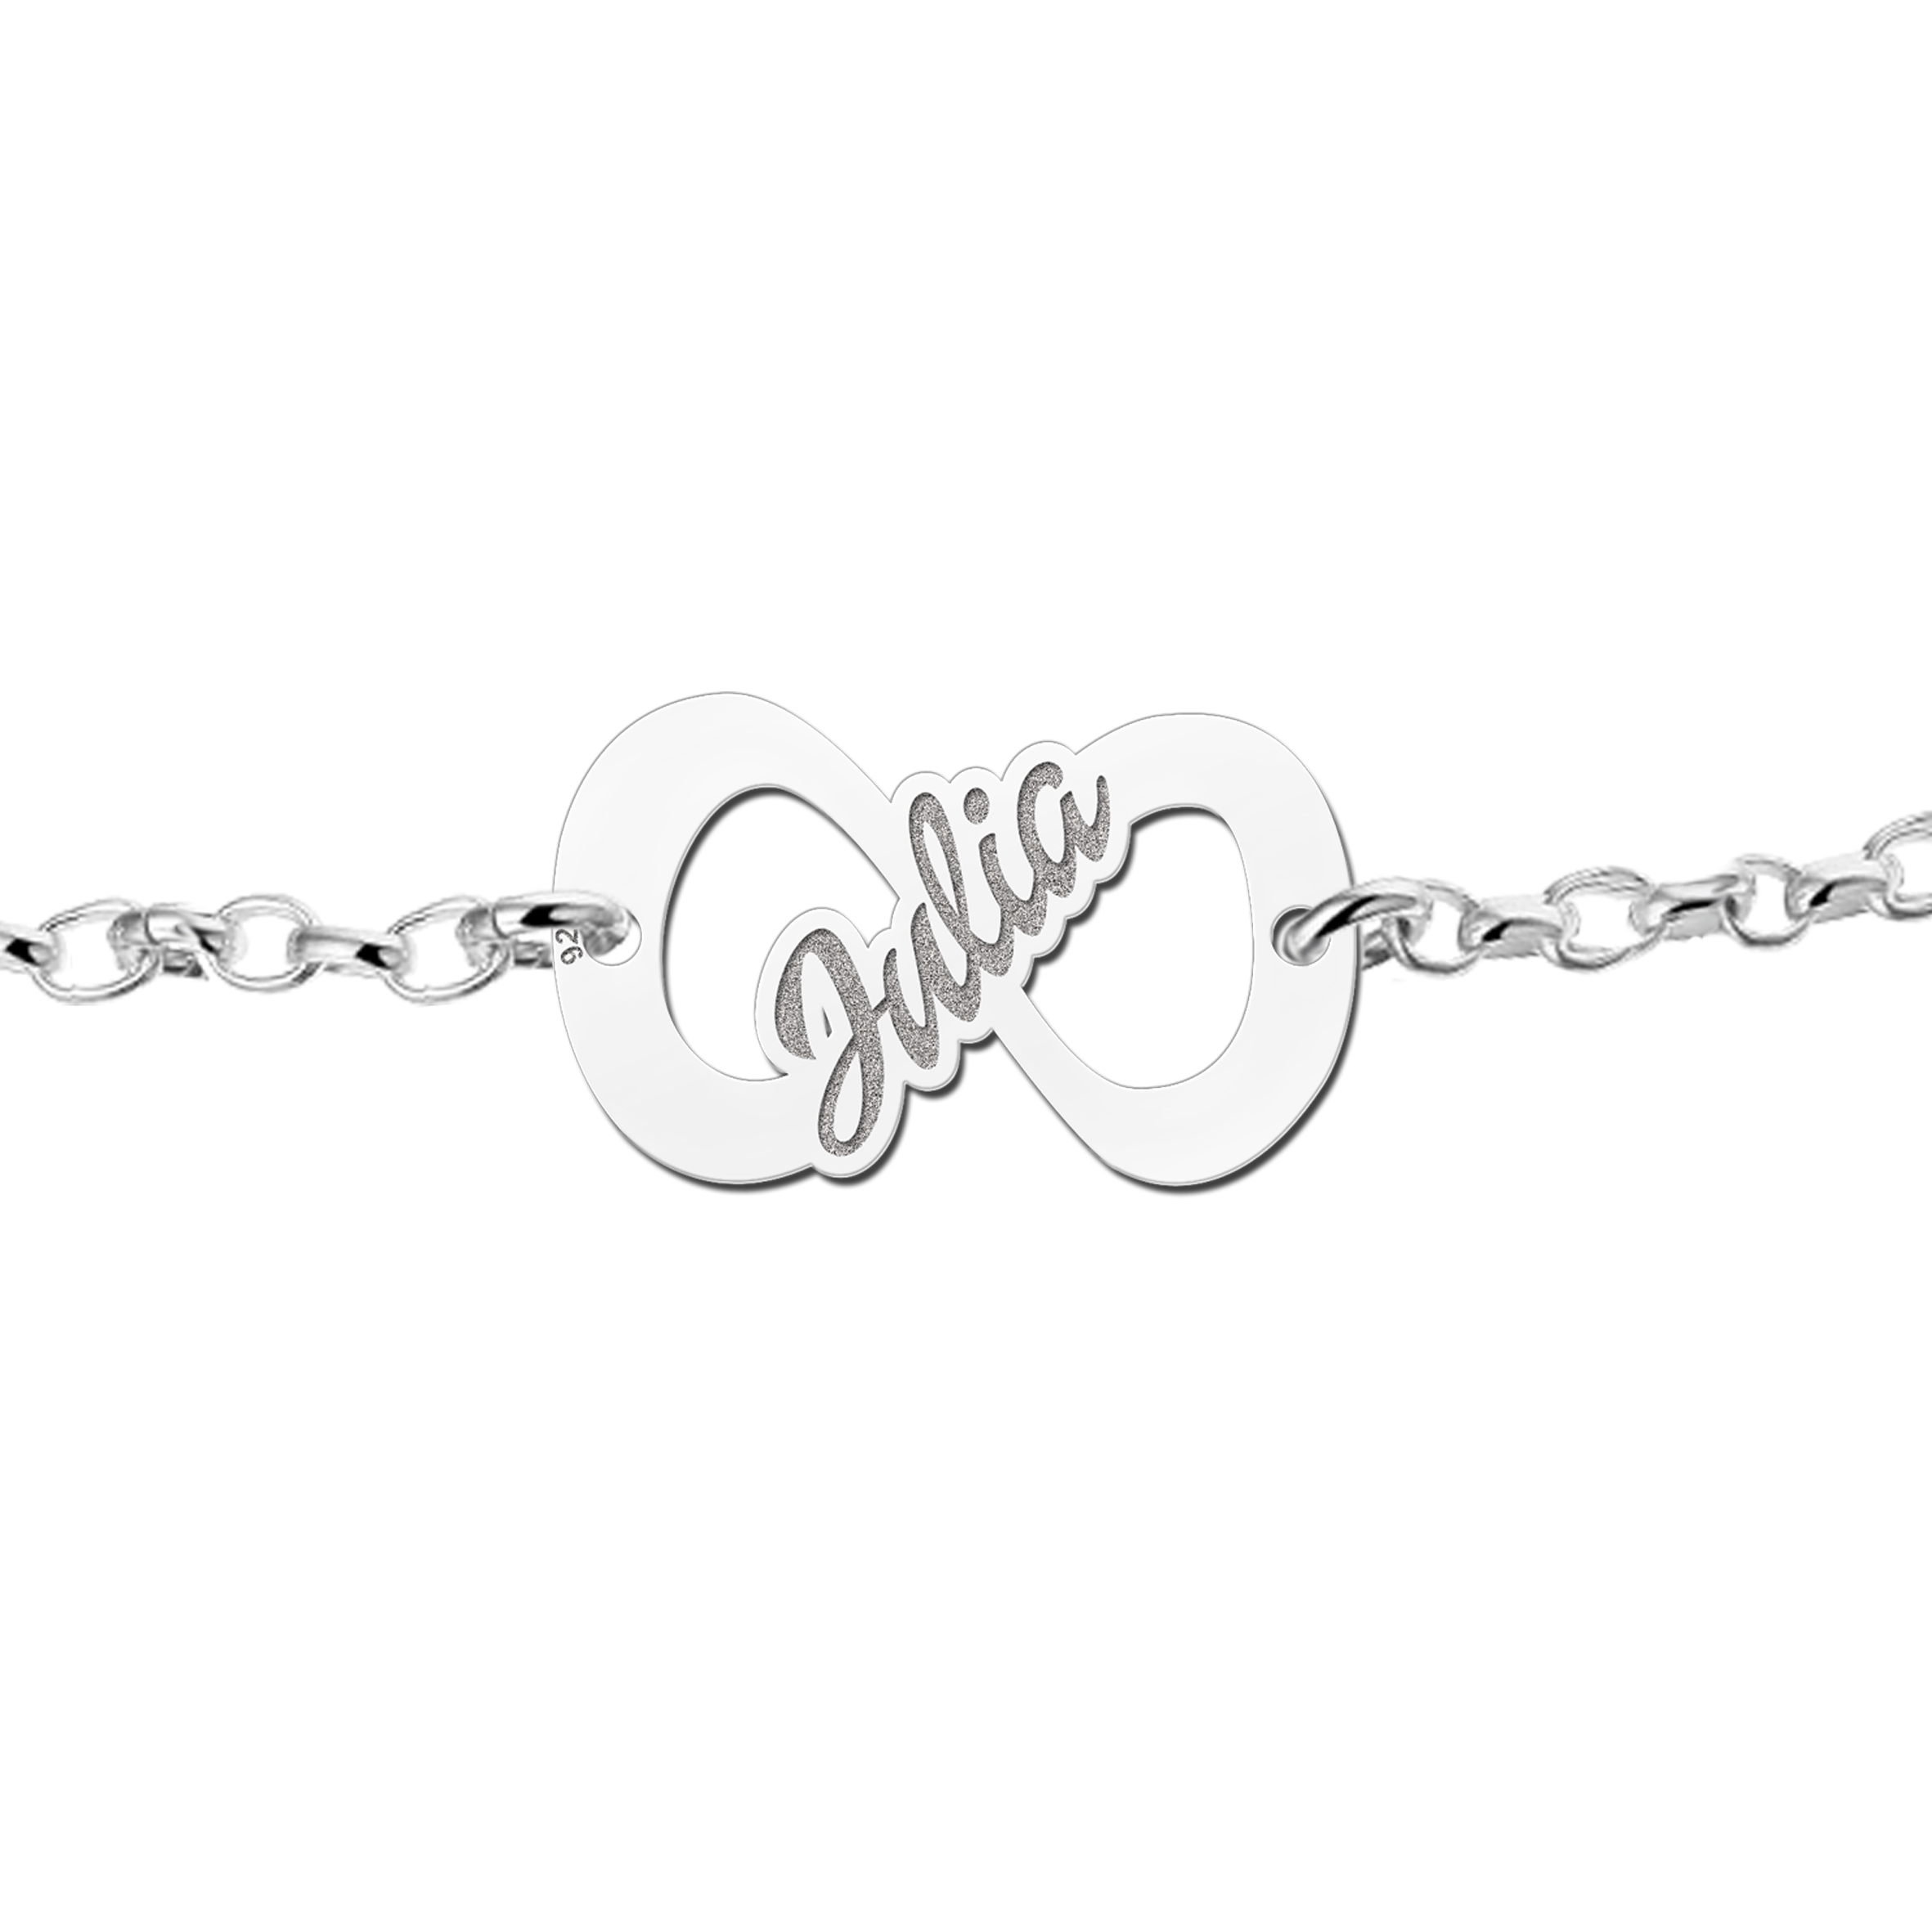 Infinity bracelet of silver with name